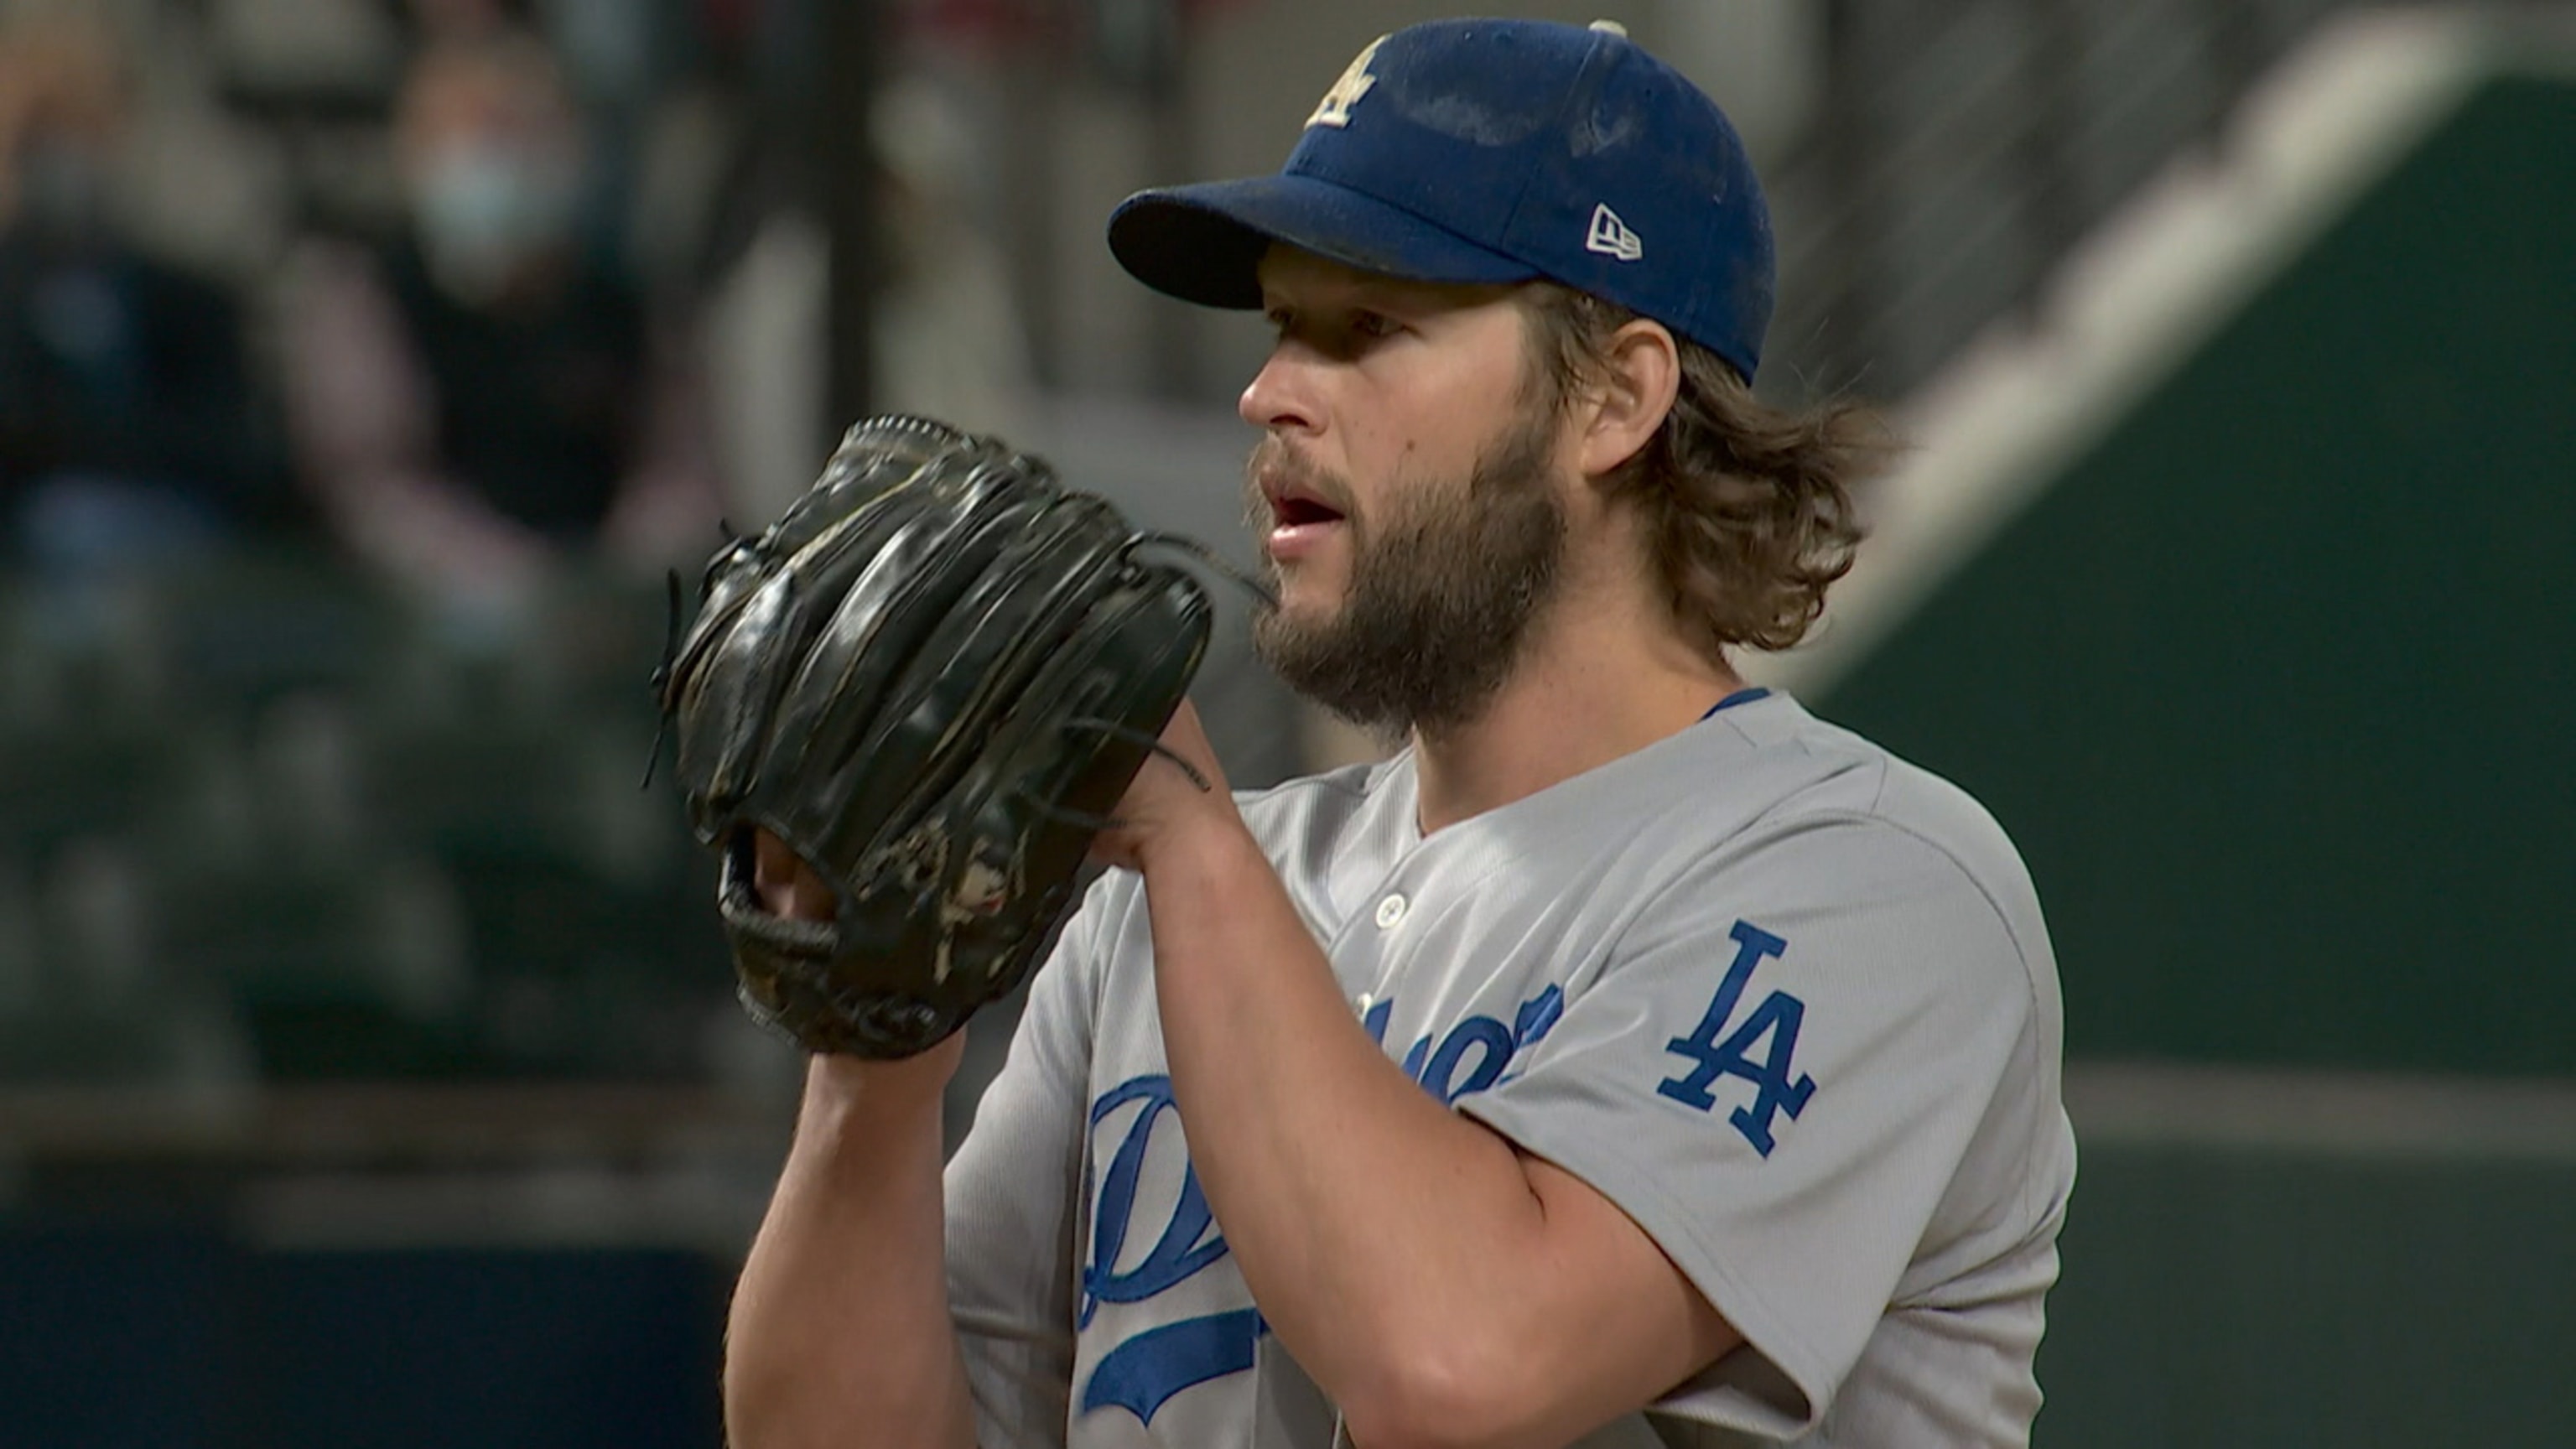 Clayton Kershaw 2nd all-time in postseason strikeouts